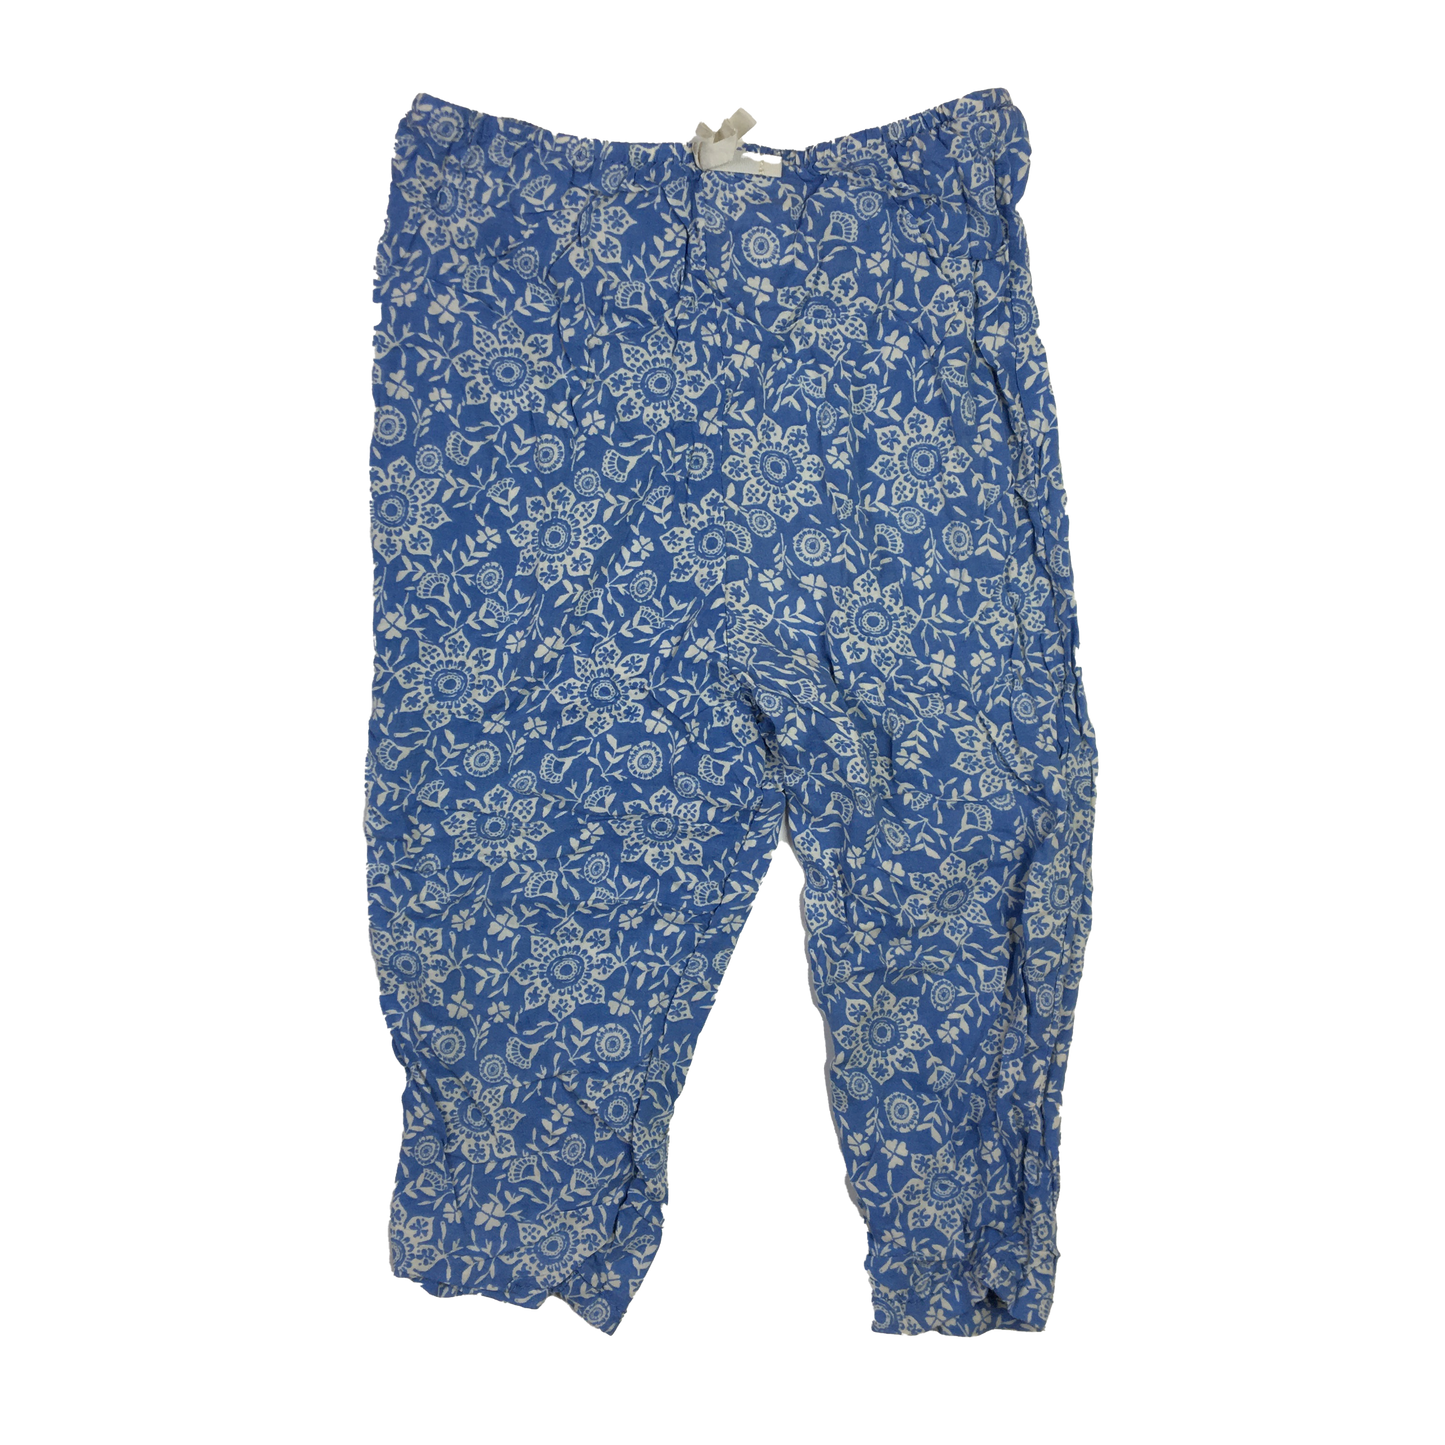 Baby B'Gosh Blue Pull-On Pants with Flowers 24M